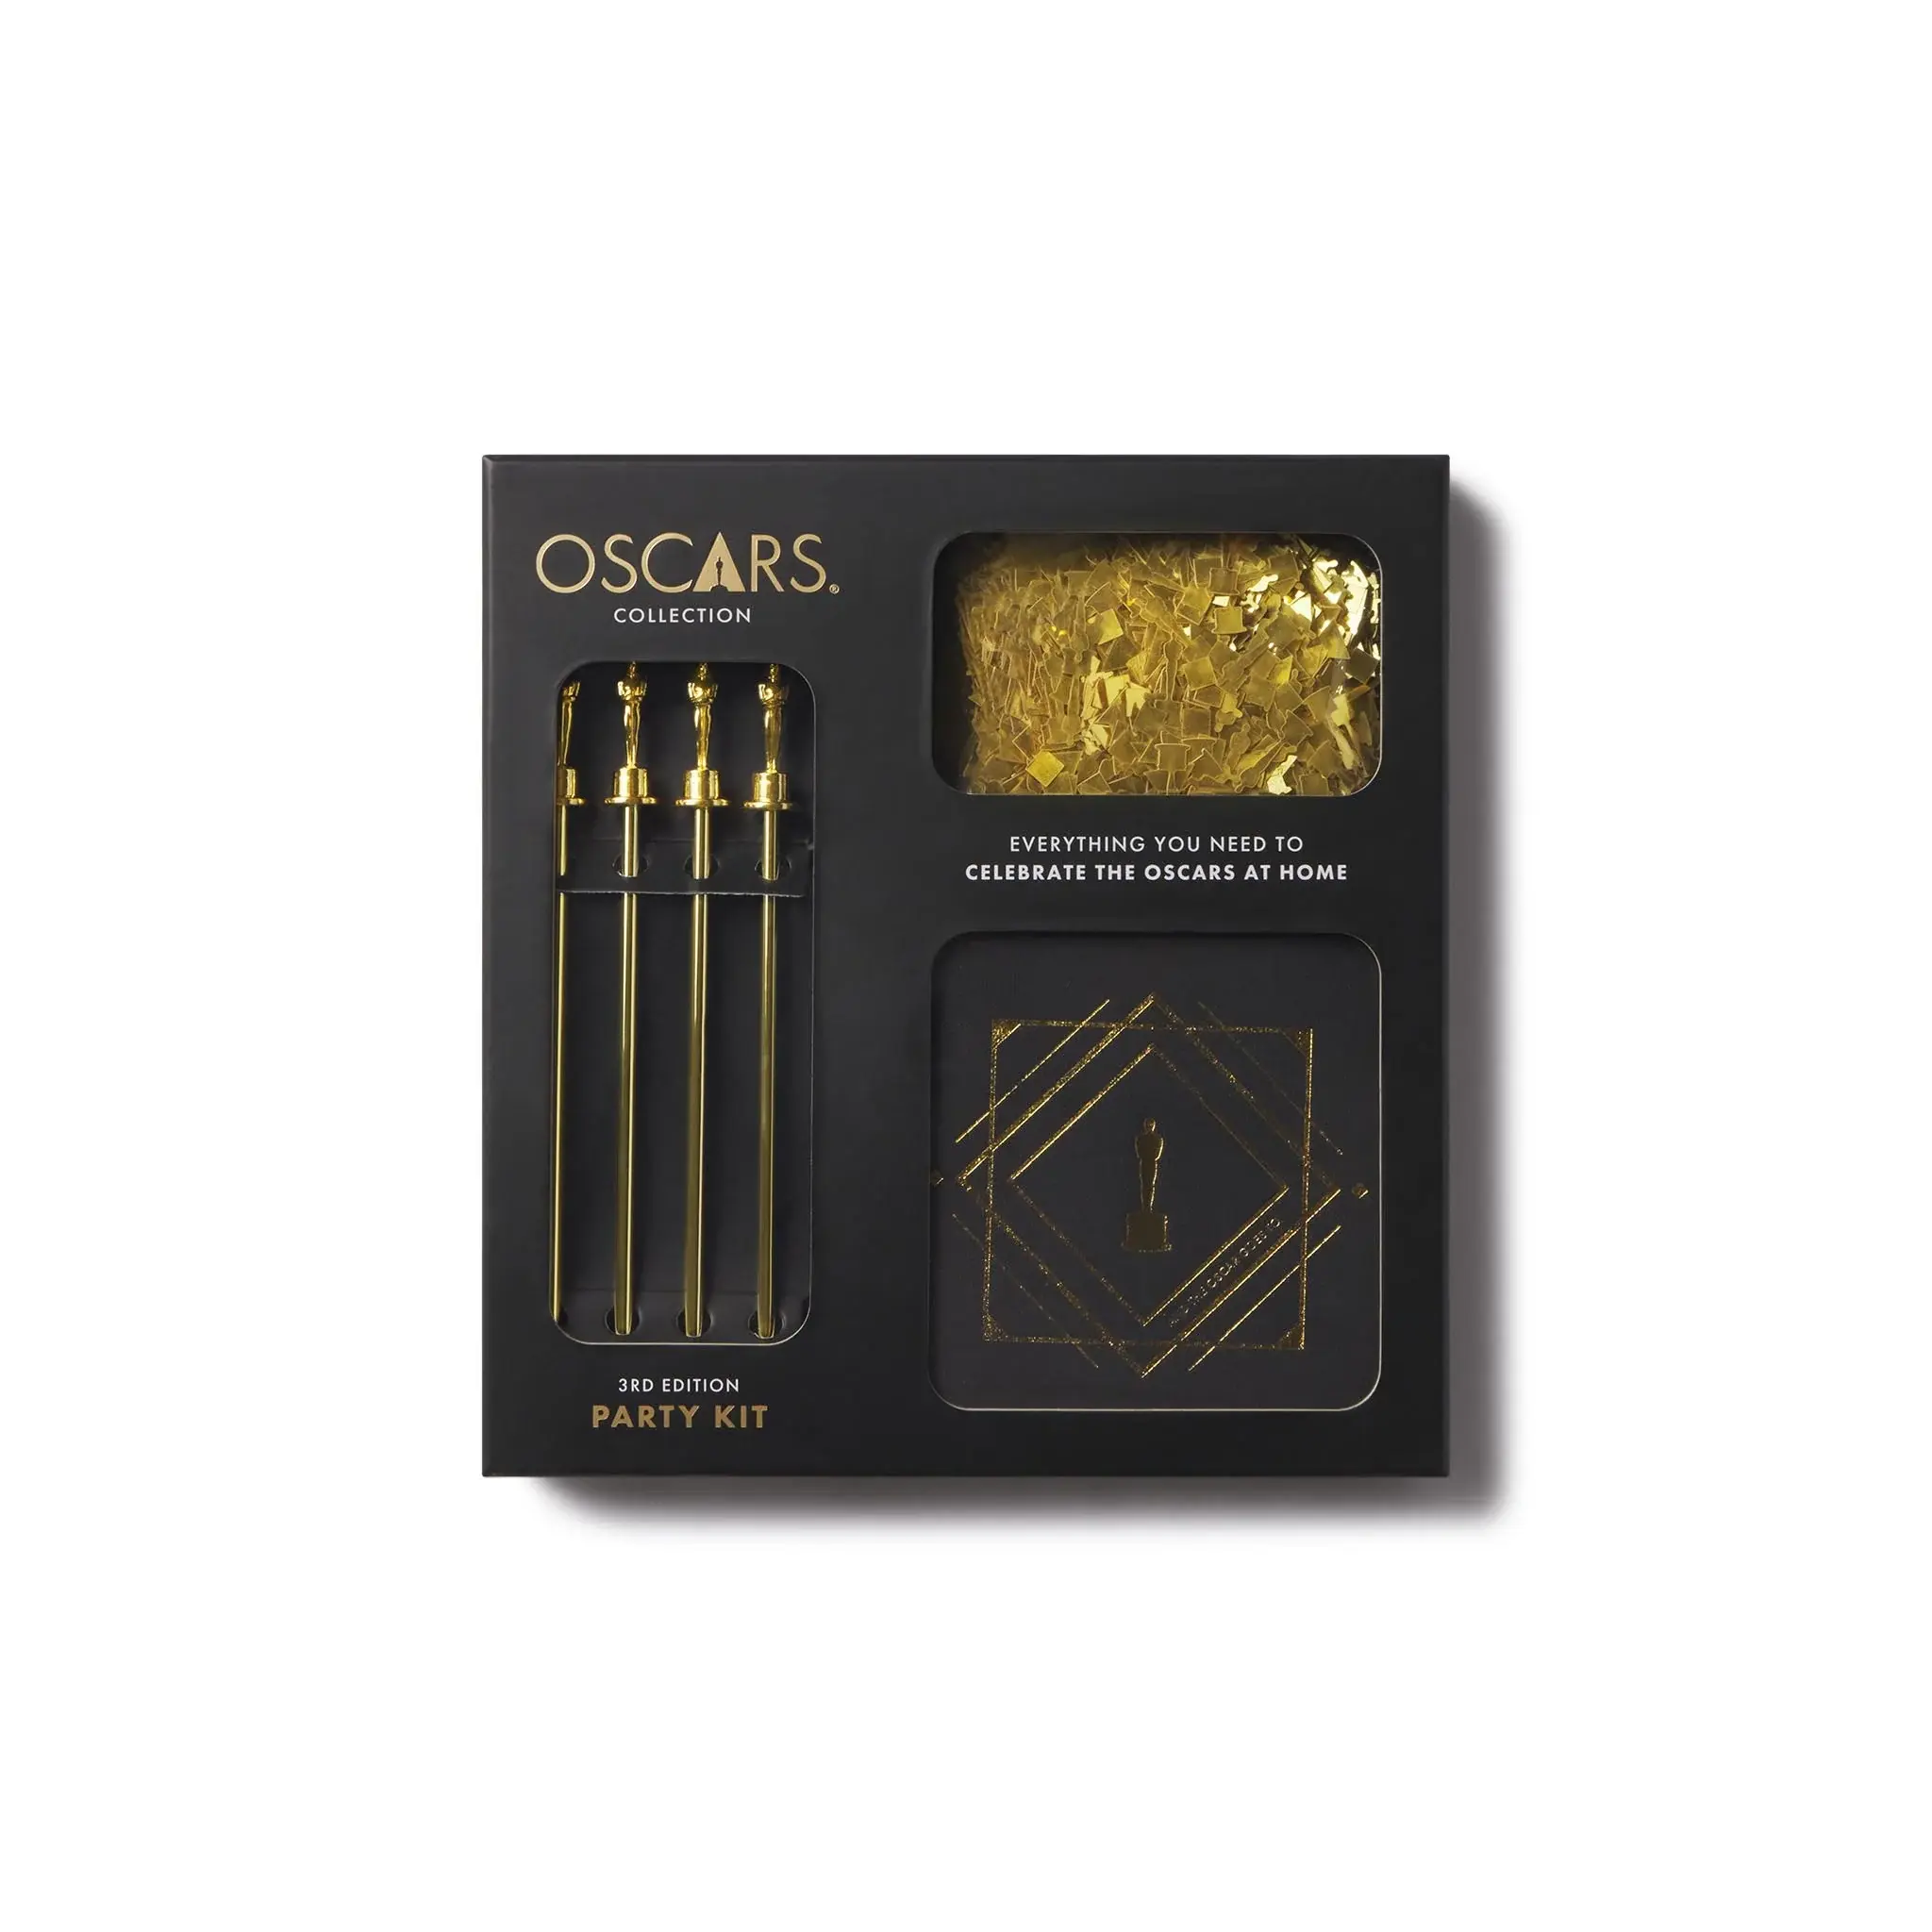 96th Oscars® Viewing Party Kit